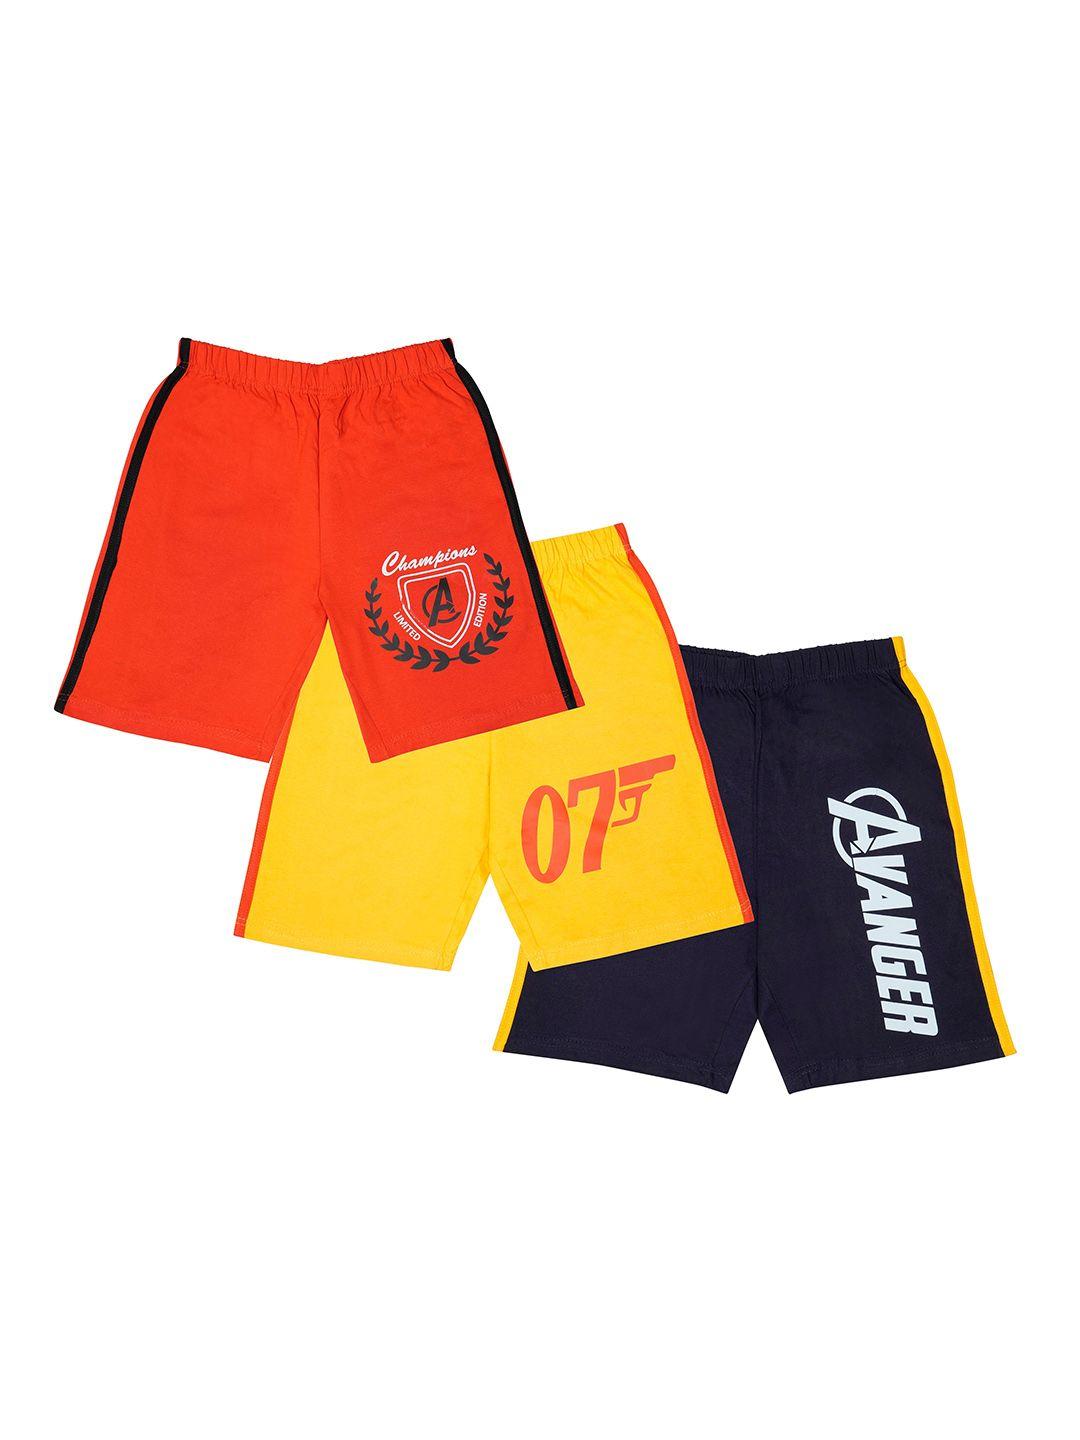 baesd boys pack of 3 typography printed pure cotton shorts